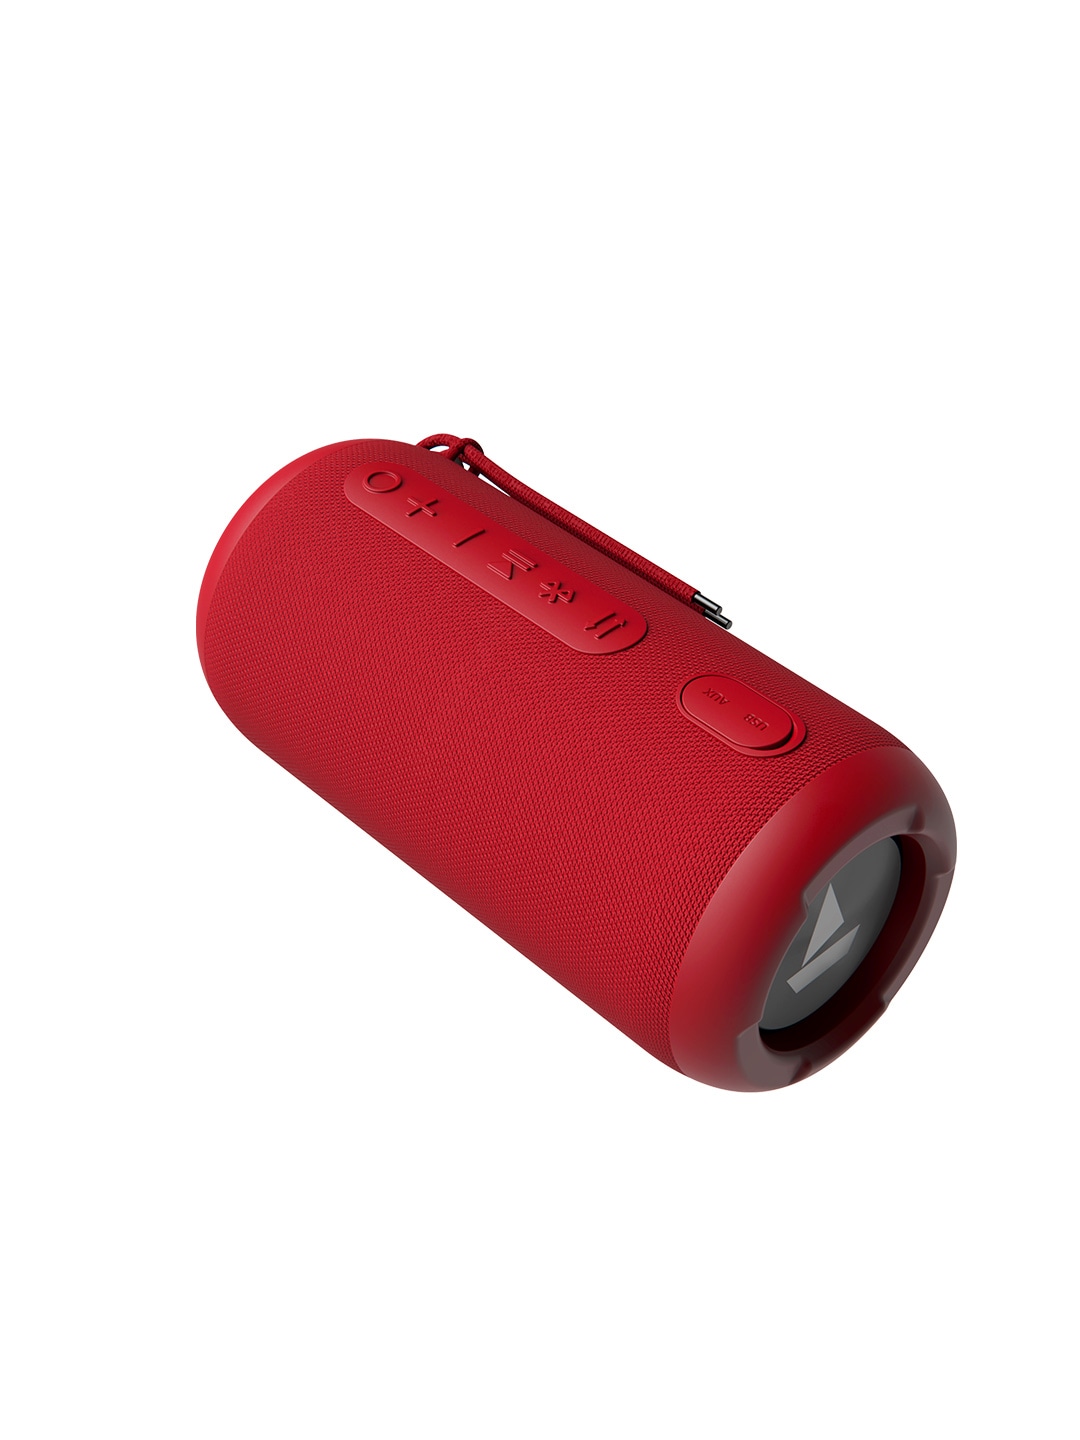 boAt Stone 850 M 16 W Bluetooth Speaker - Red Price in India